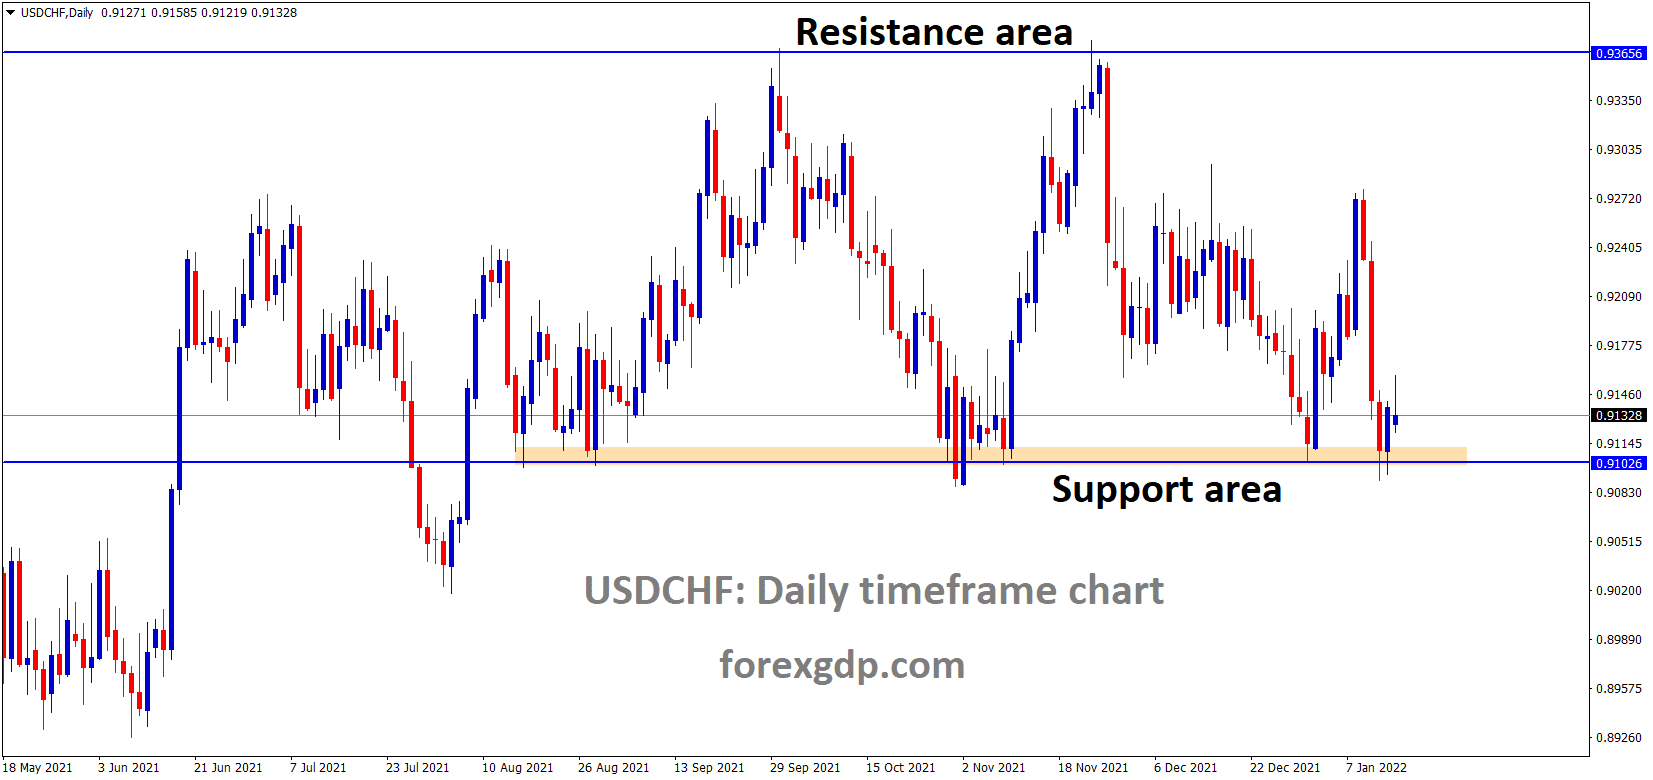 USDCHF is moving in the Box Pattern and the market has rebounded from the horizontal support area of the pattern.